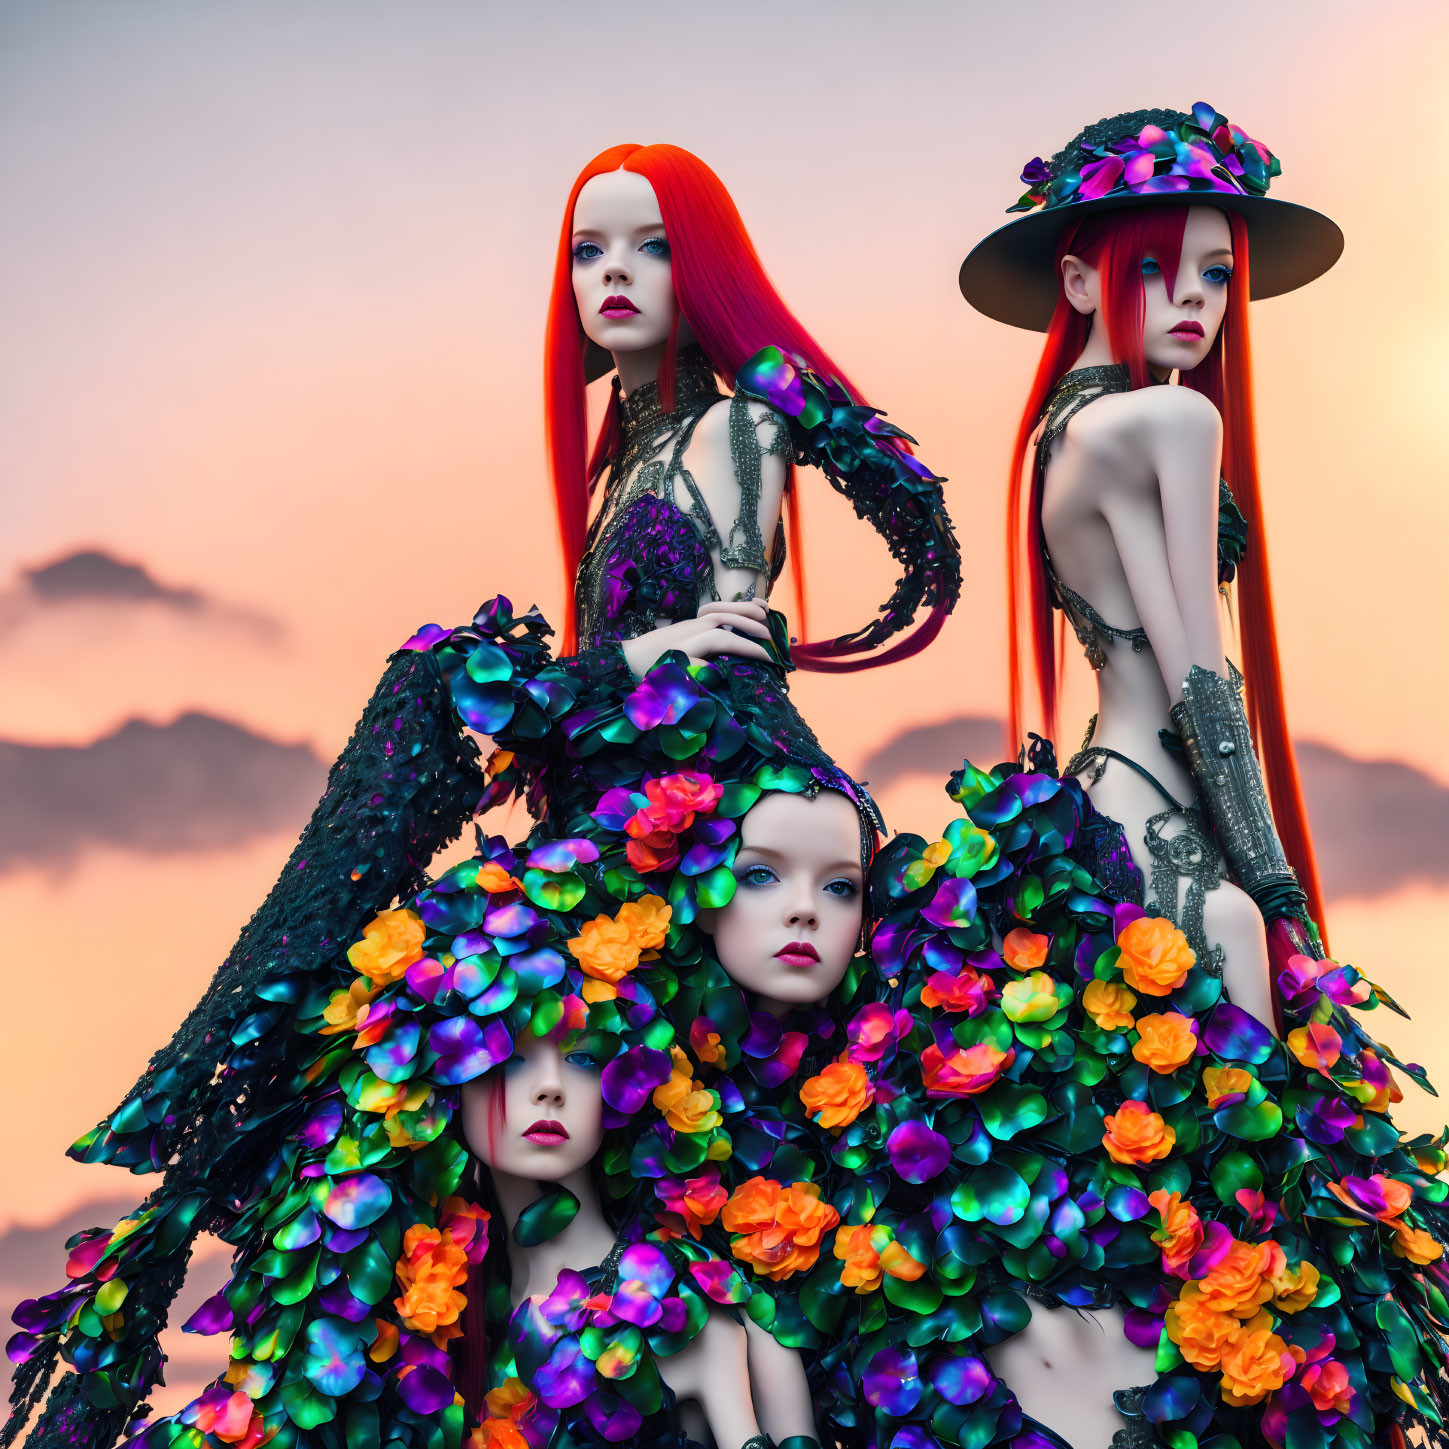 Mannequins with Red Hair in Floral Dresses on Sunset Sky Background